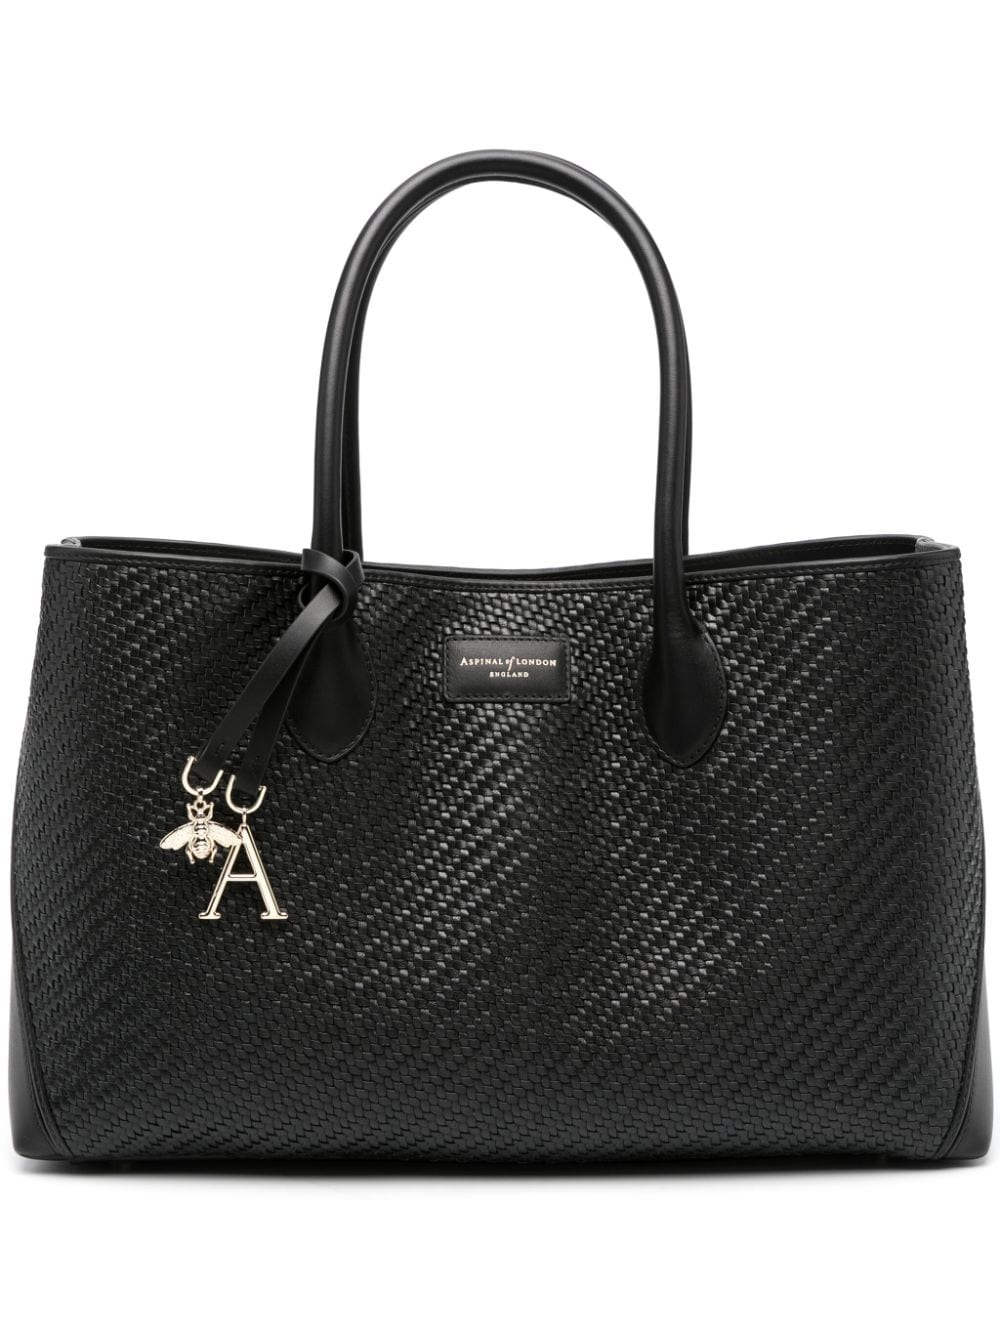 Aspinal Of London London Woven Tote Bag In Schwarz